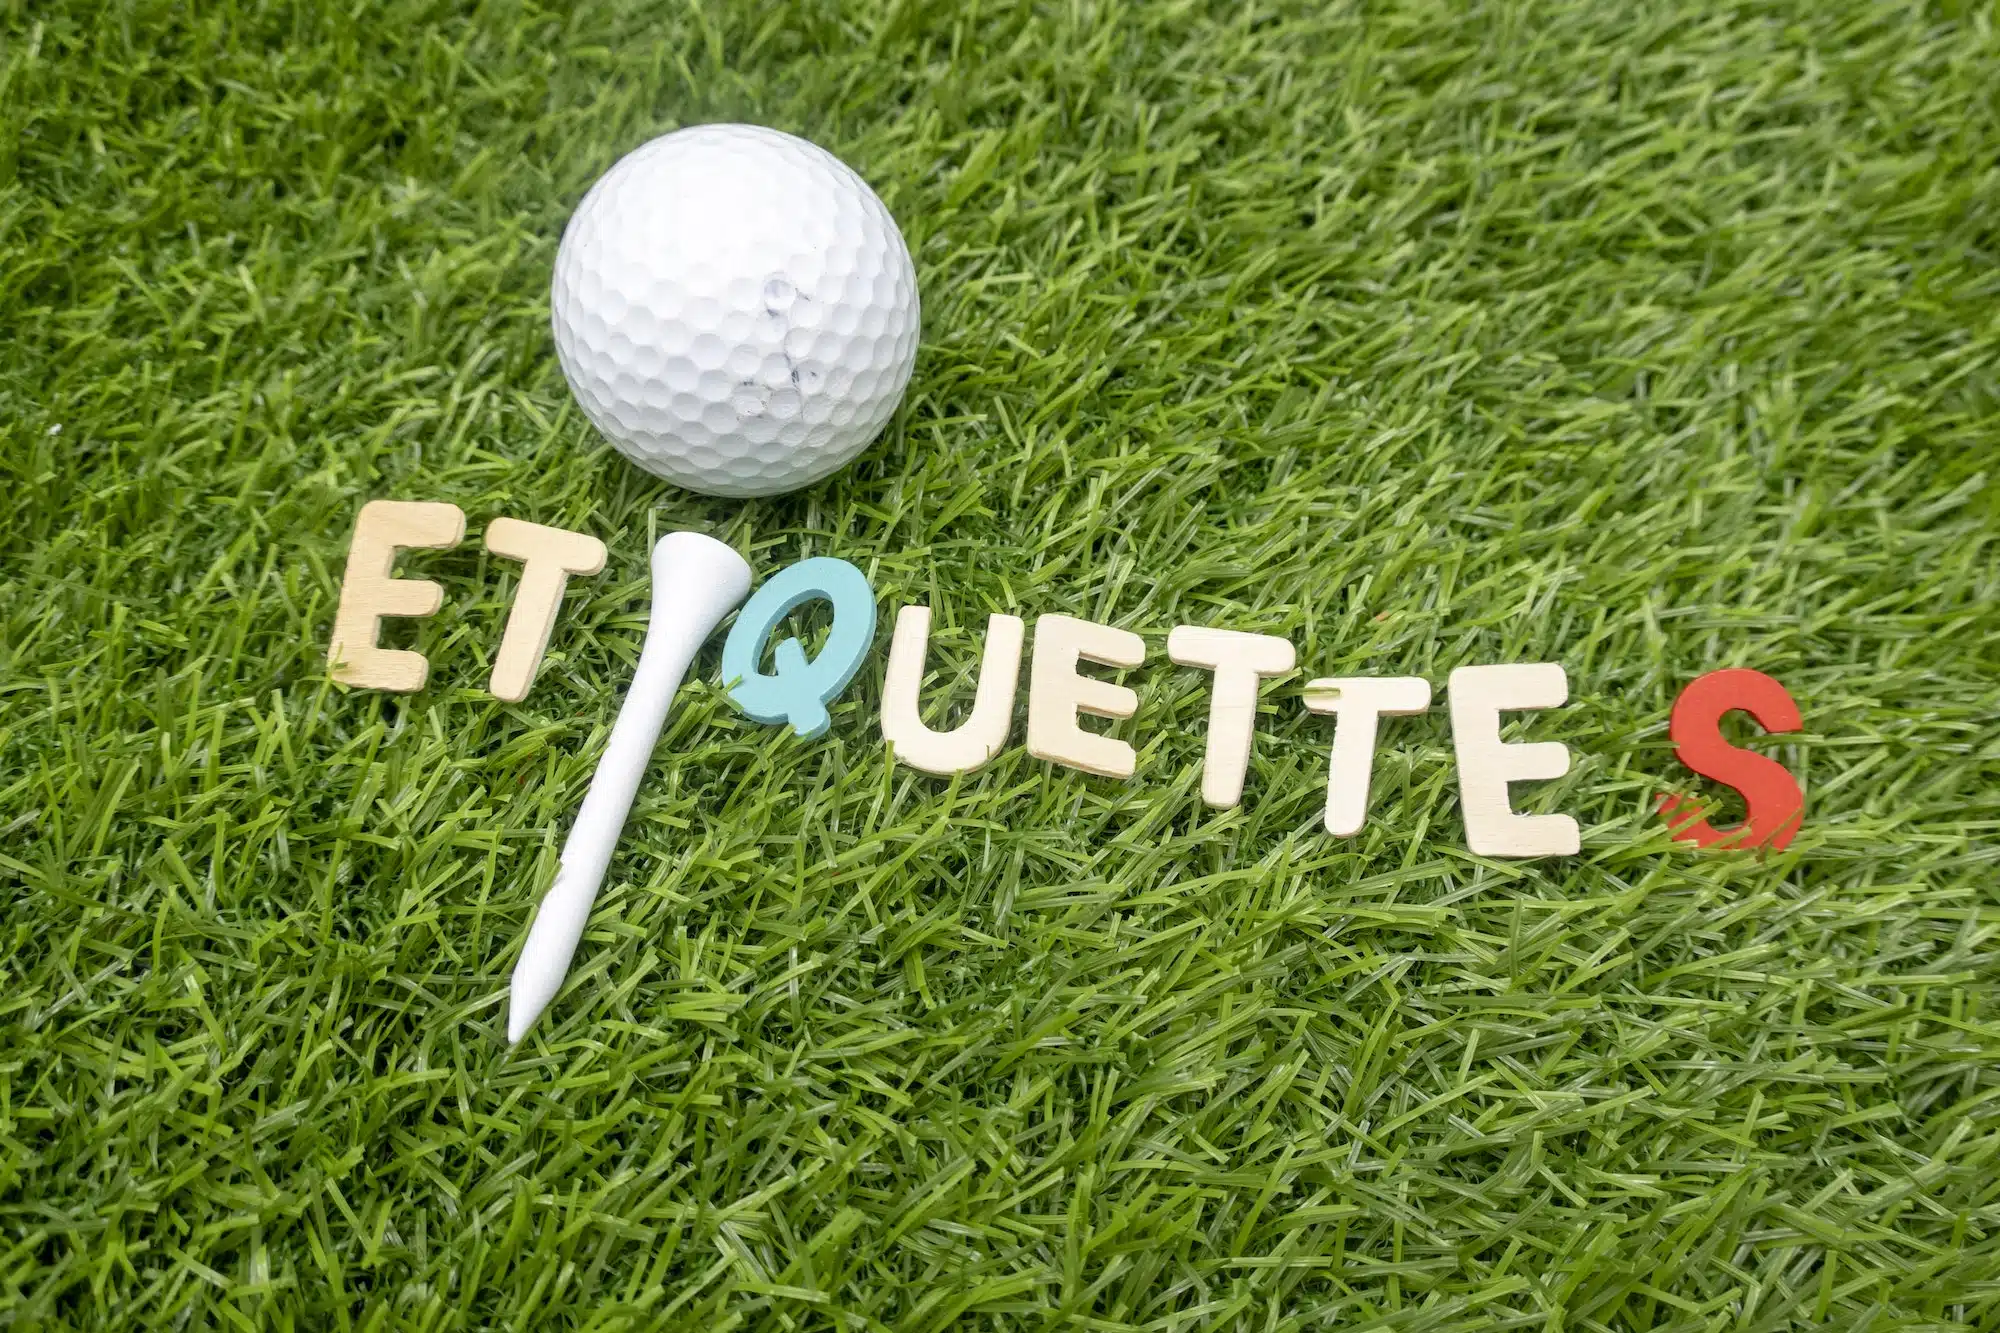 etiquette word on green grass with golf ball